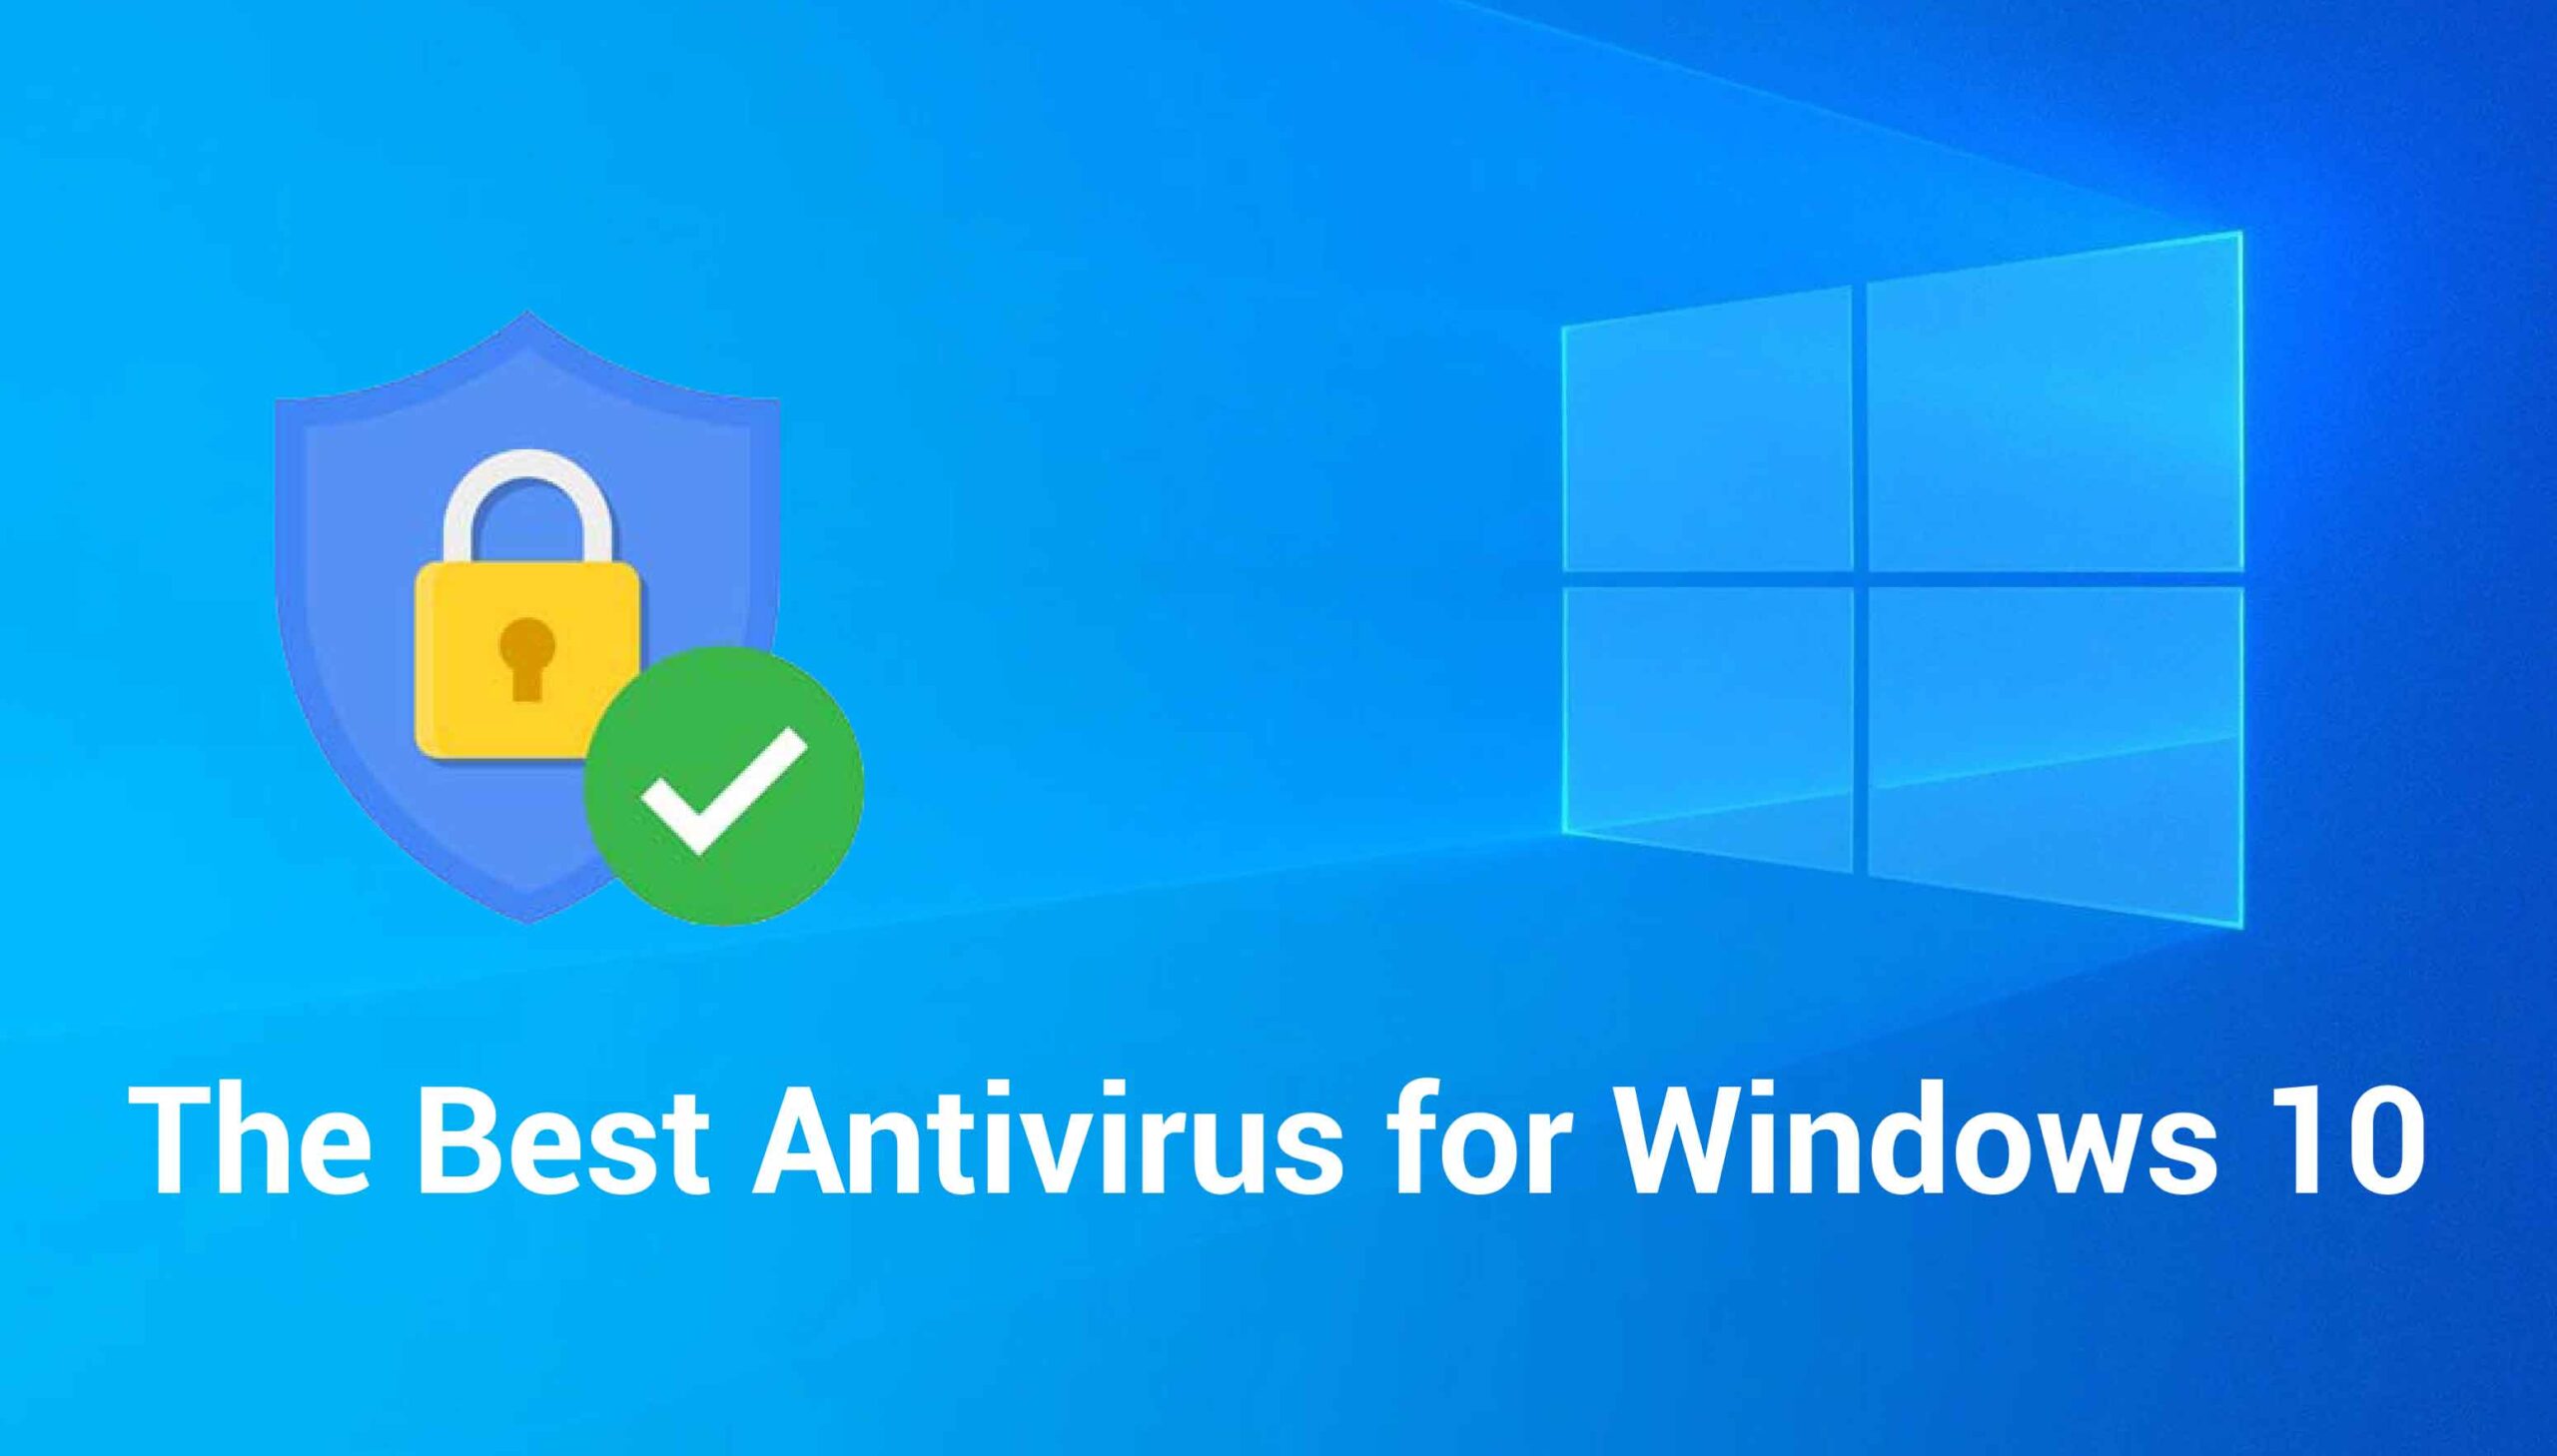 The best antivirus for Windows 10 (and 11) 5